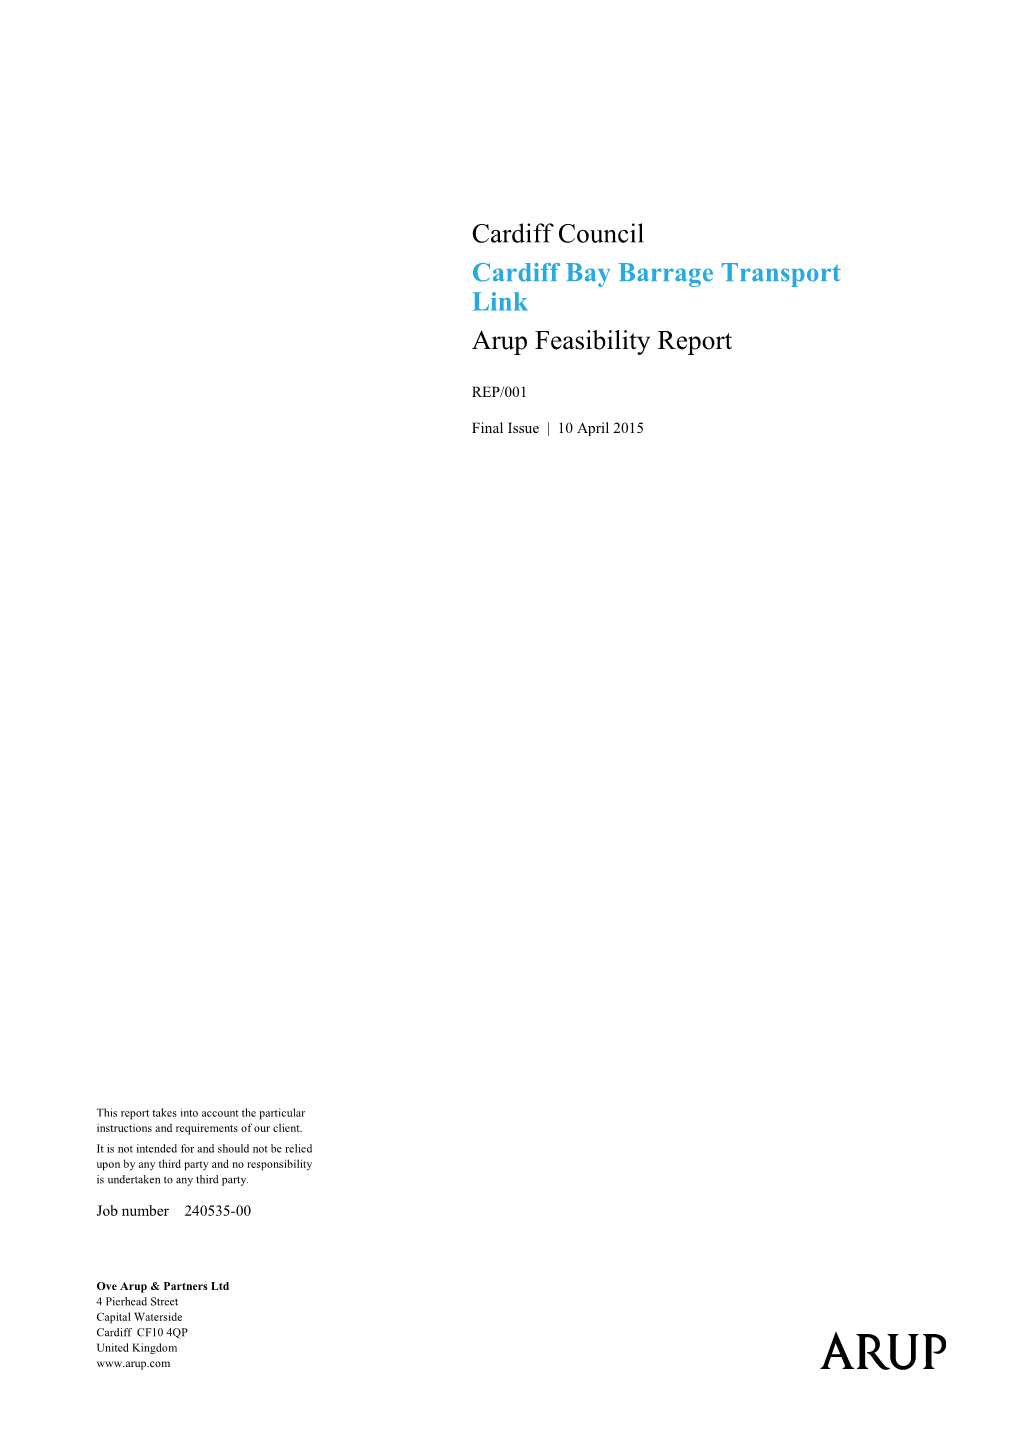 Cardiff Barrage Transport Link Report Issue 13 04 15.Docx